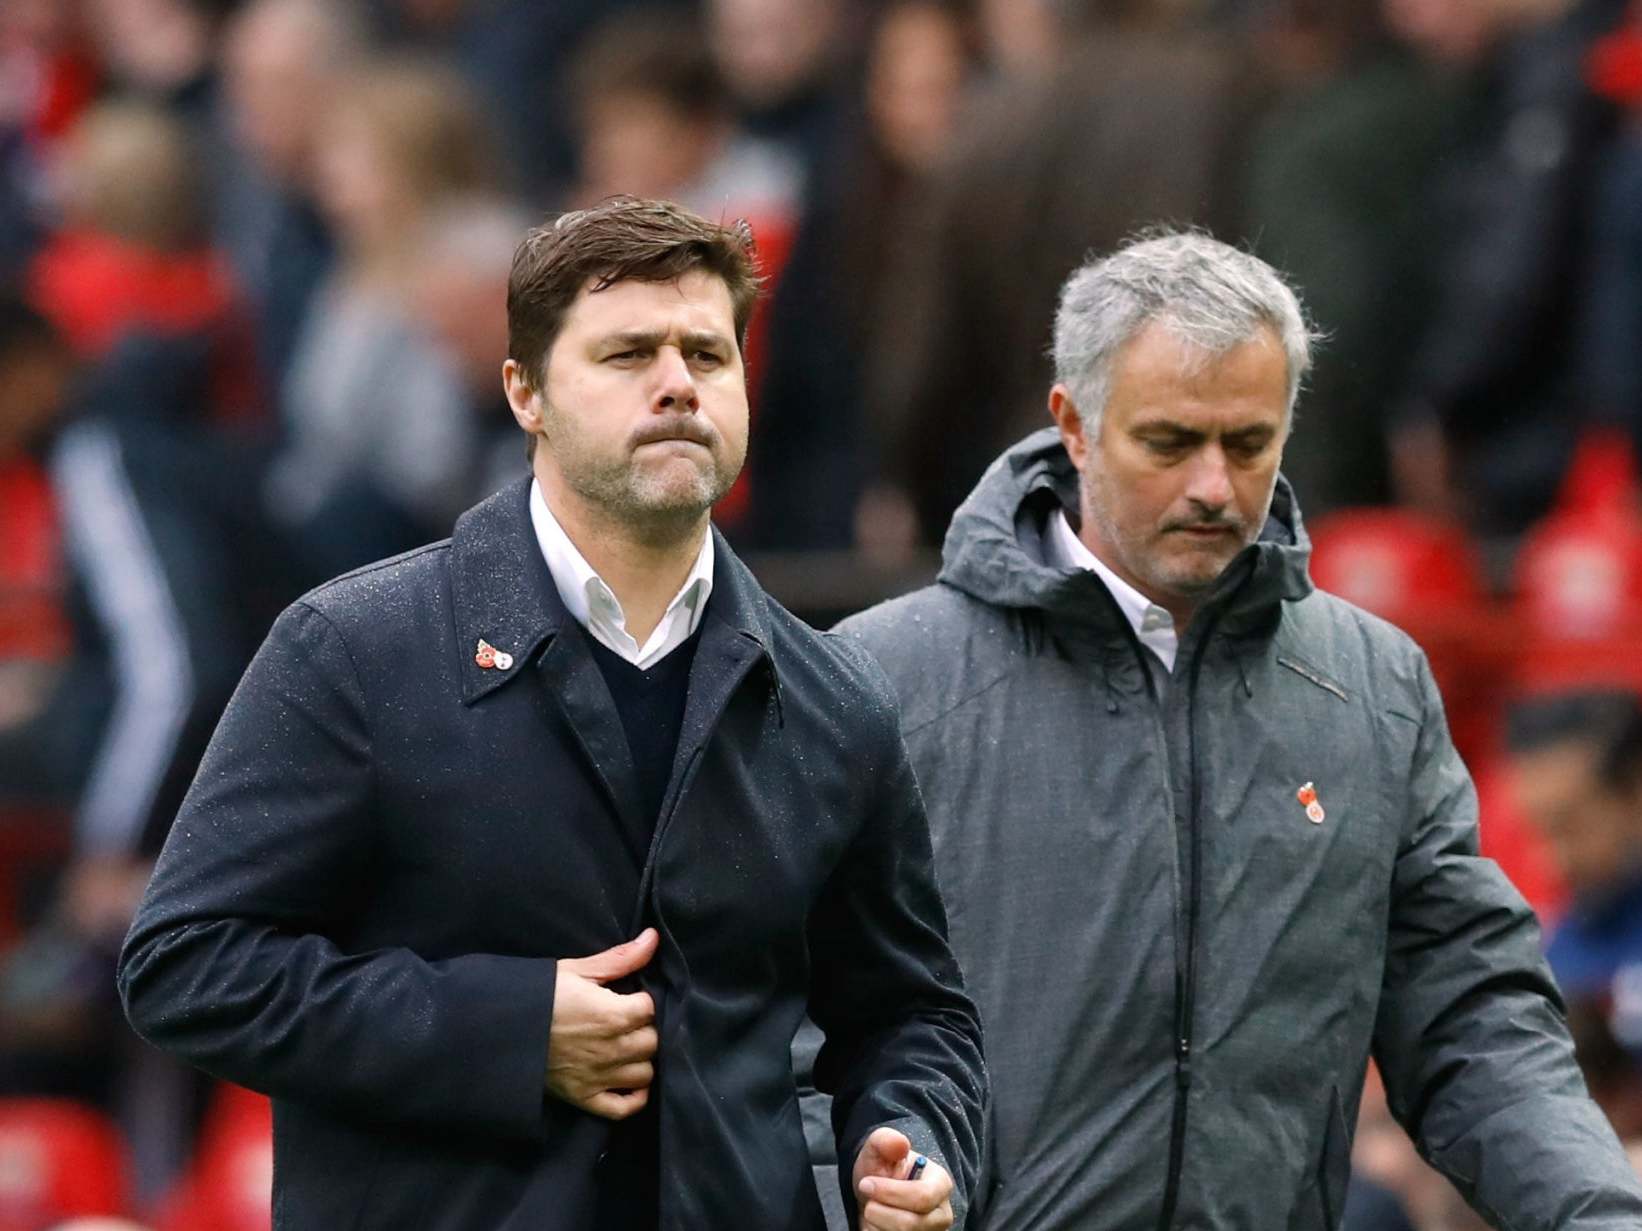 Mourinho felt sympathy for Pochettino after the final in Madrid